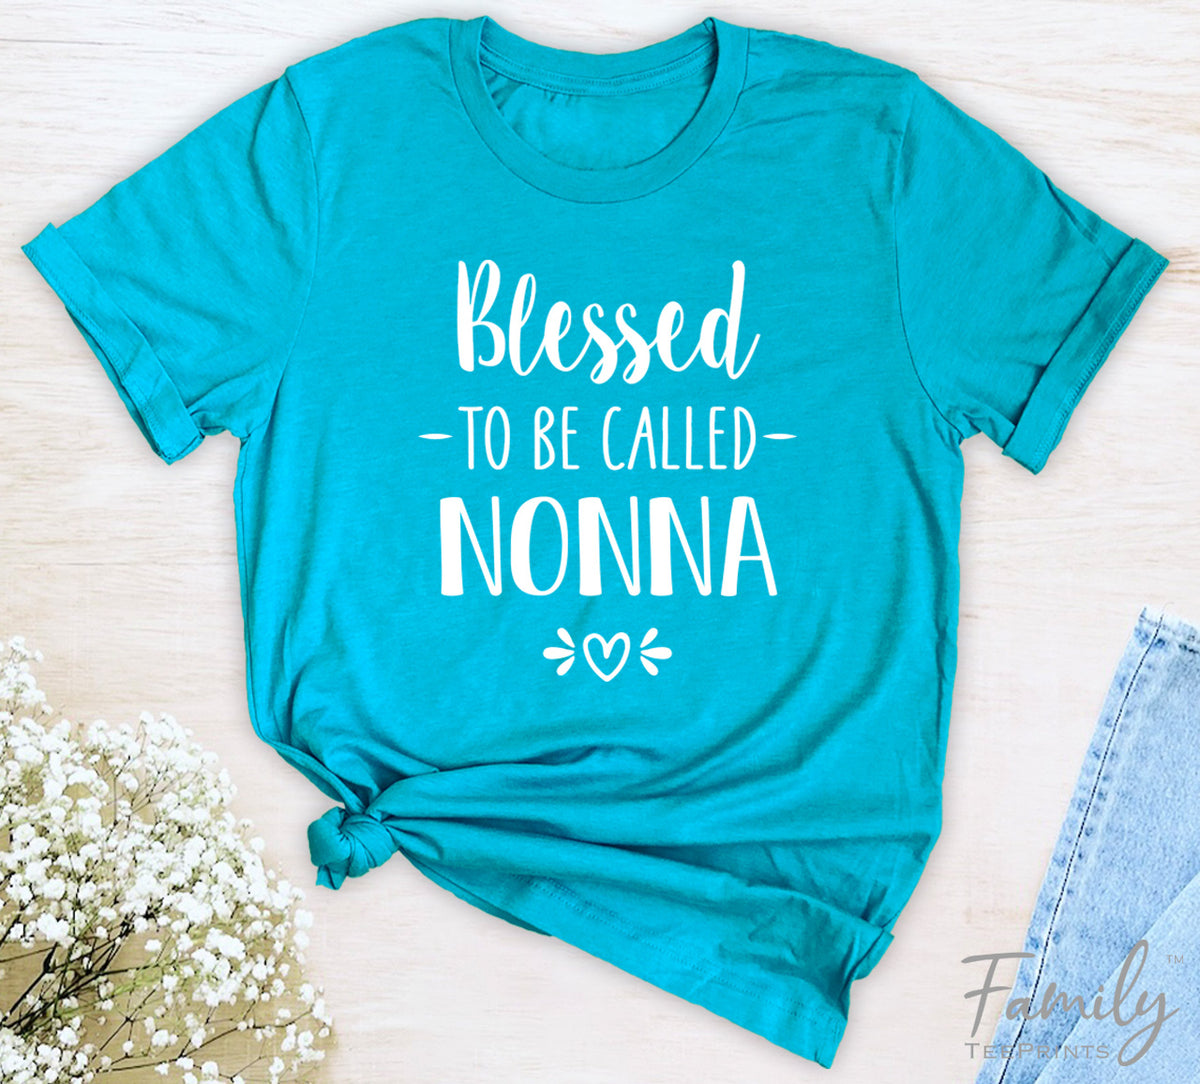 Blessed To Be Called Nonna - Unisex T-shirt - Nonna Shirt - Gift For New Nonna